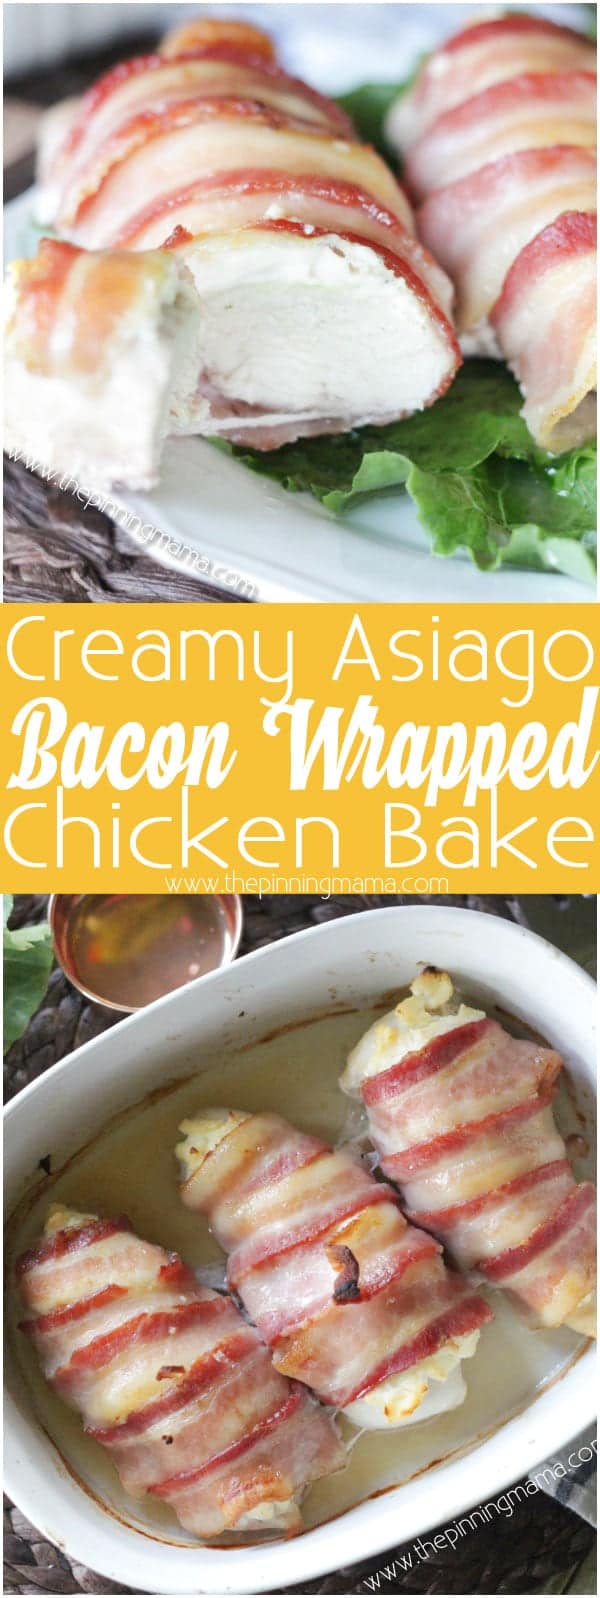 Bacon Wrapped Creamy Asiago Chicken Bake - Flavors of creamy asiago cheese and juicy chicken breast wrapped up in bacon. Does it get any better than this?! YUM!